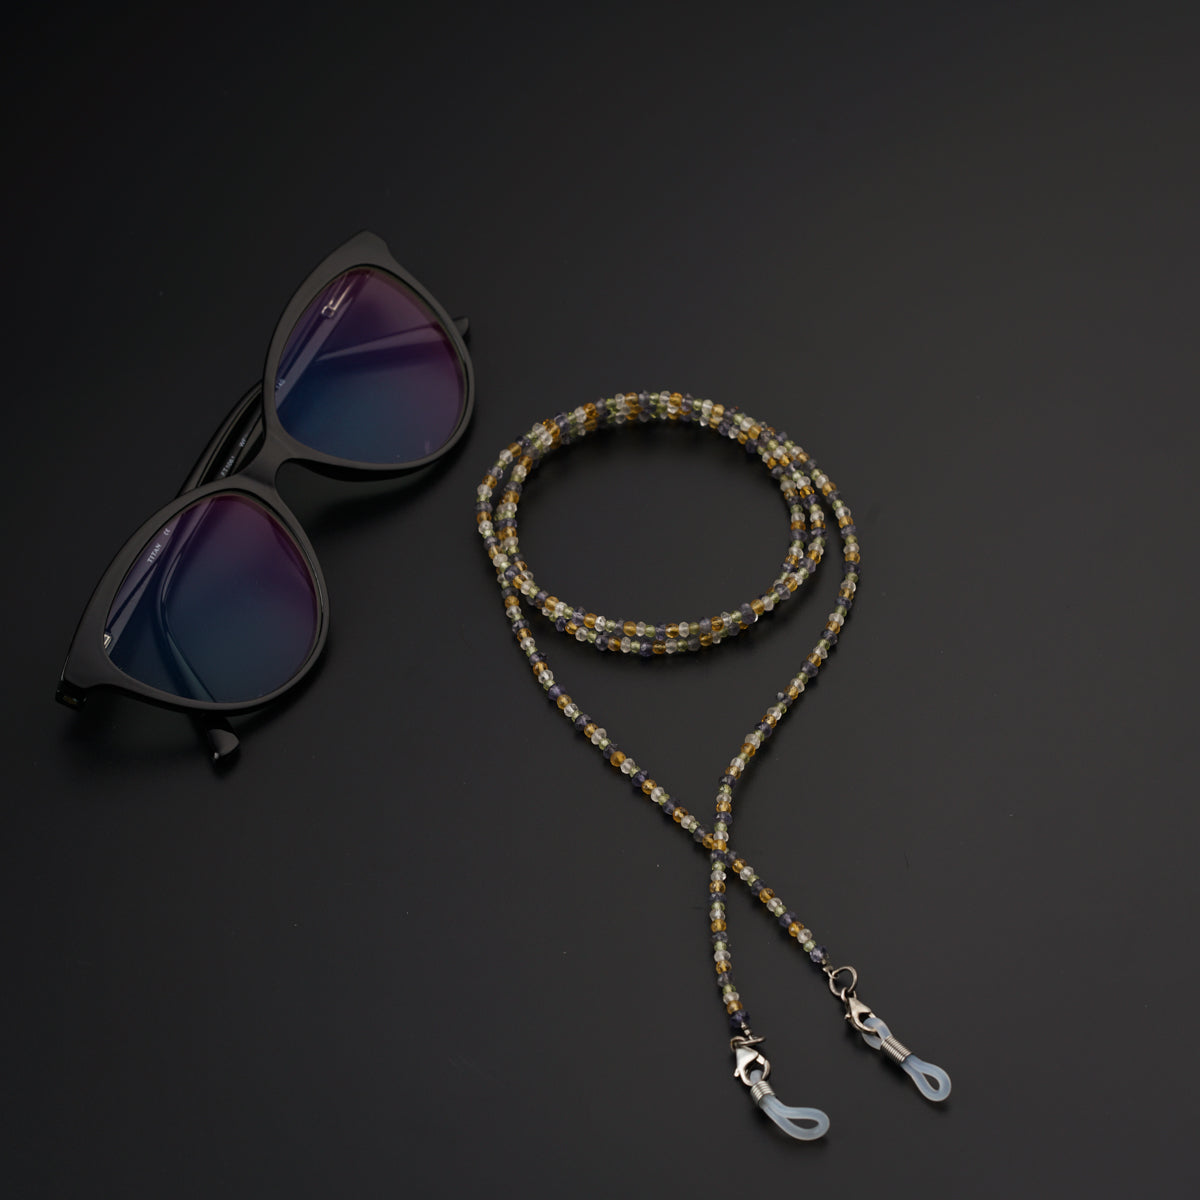 a lanyard with sunglasses and a pair of sunglasses